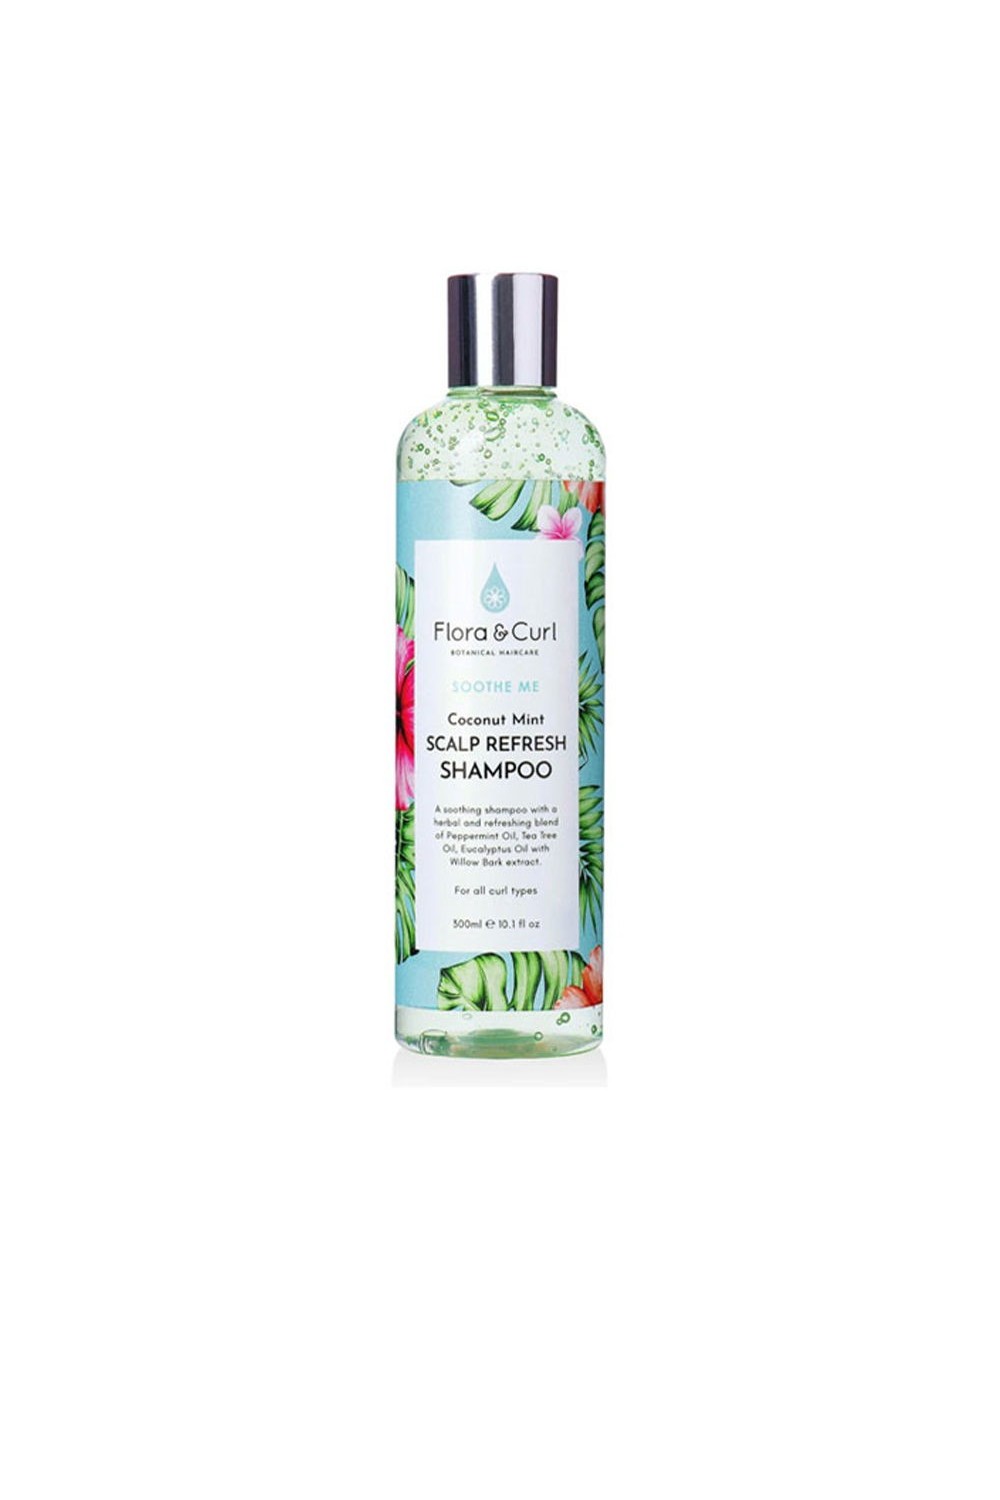 Flora and Curl Soothe Me Coconut Mint Scalp Refresh Shampoo 300ml